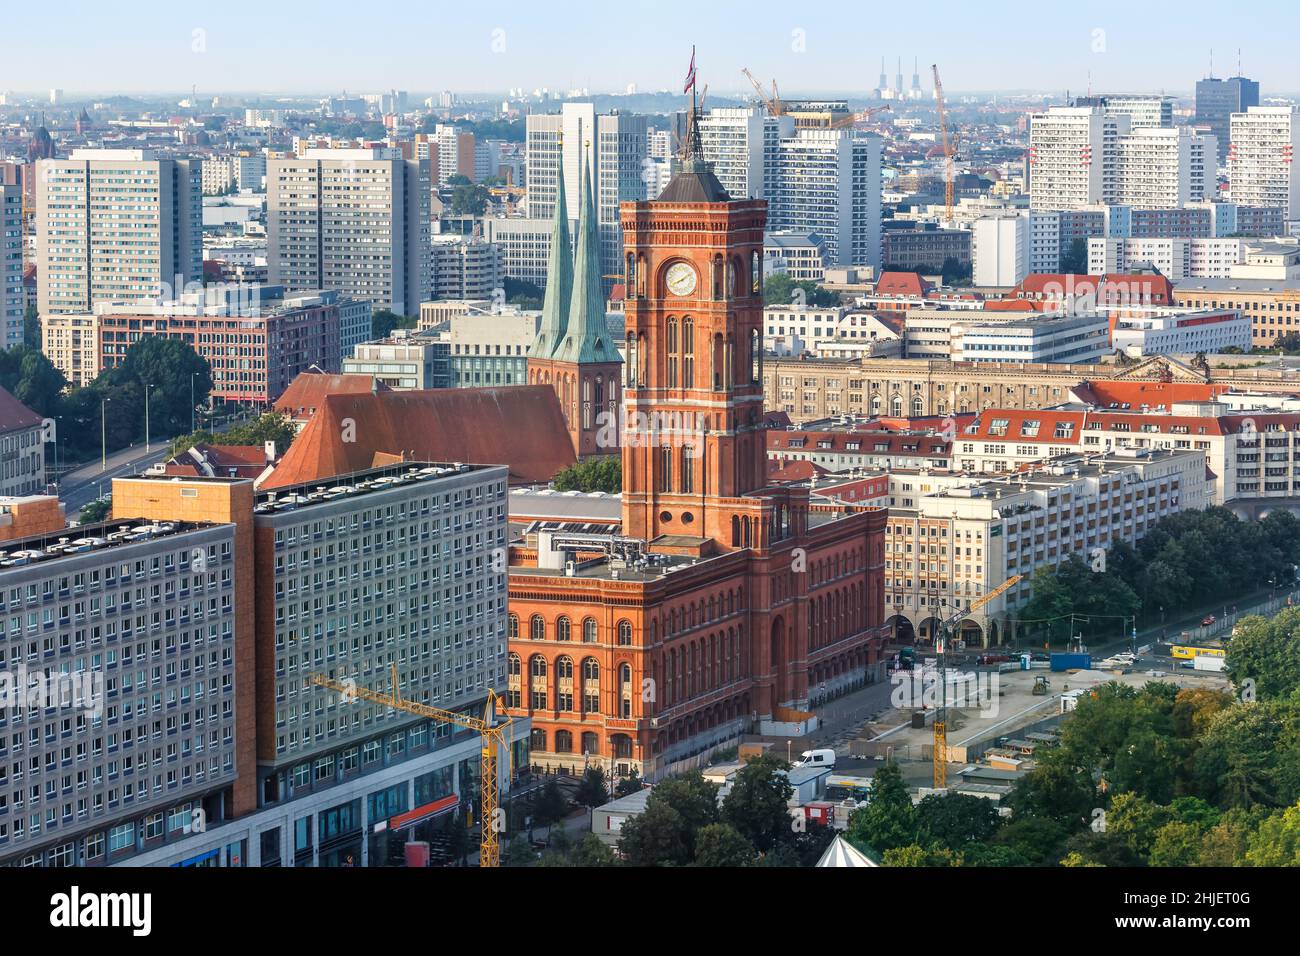 Berlin Rotes Rathaus town city hall skyline in Germany aerial view photo Stock Photo